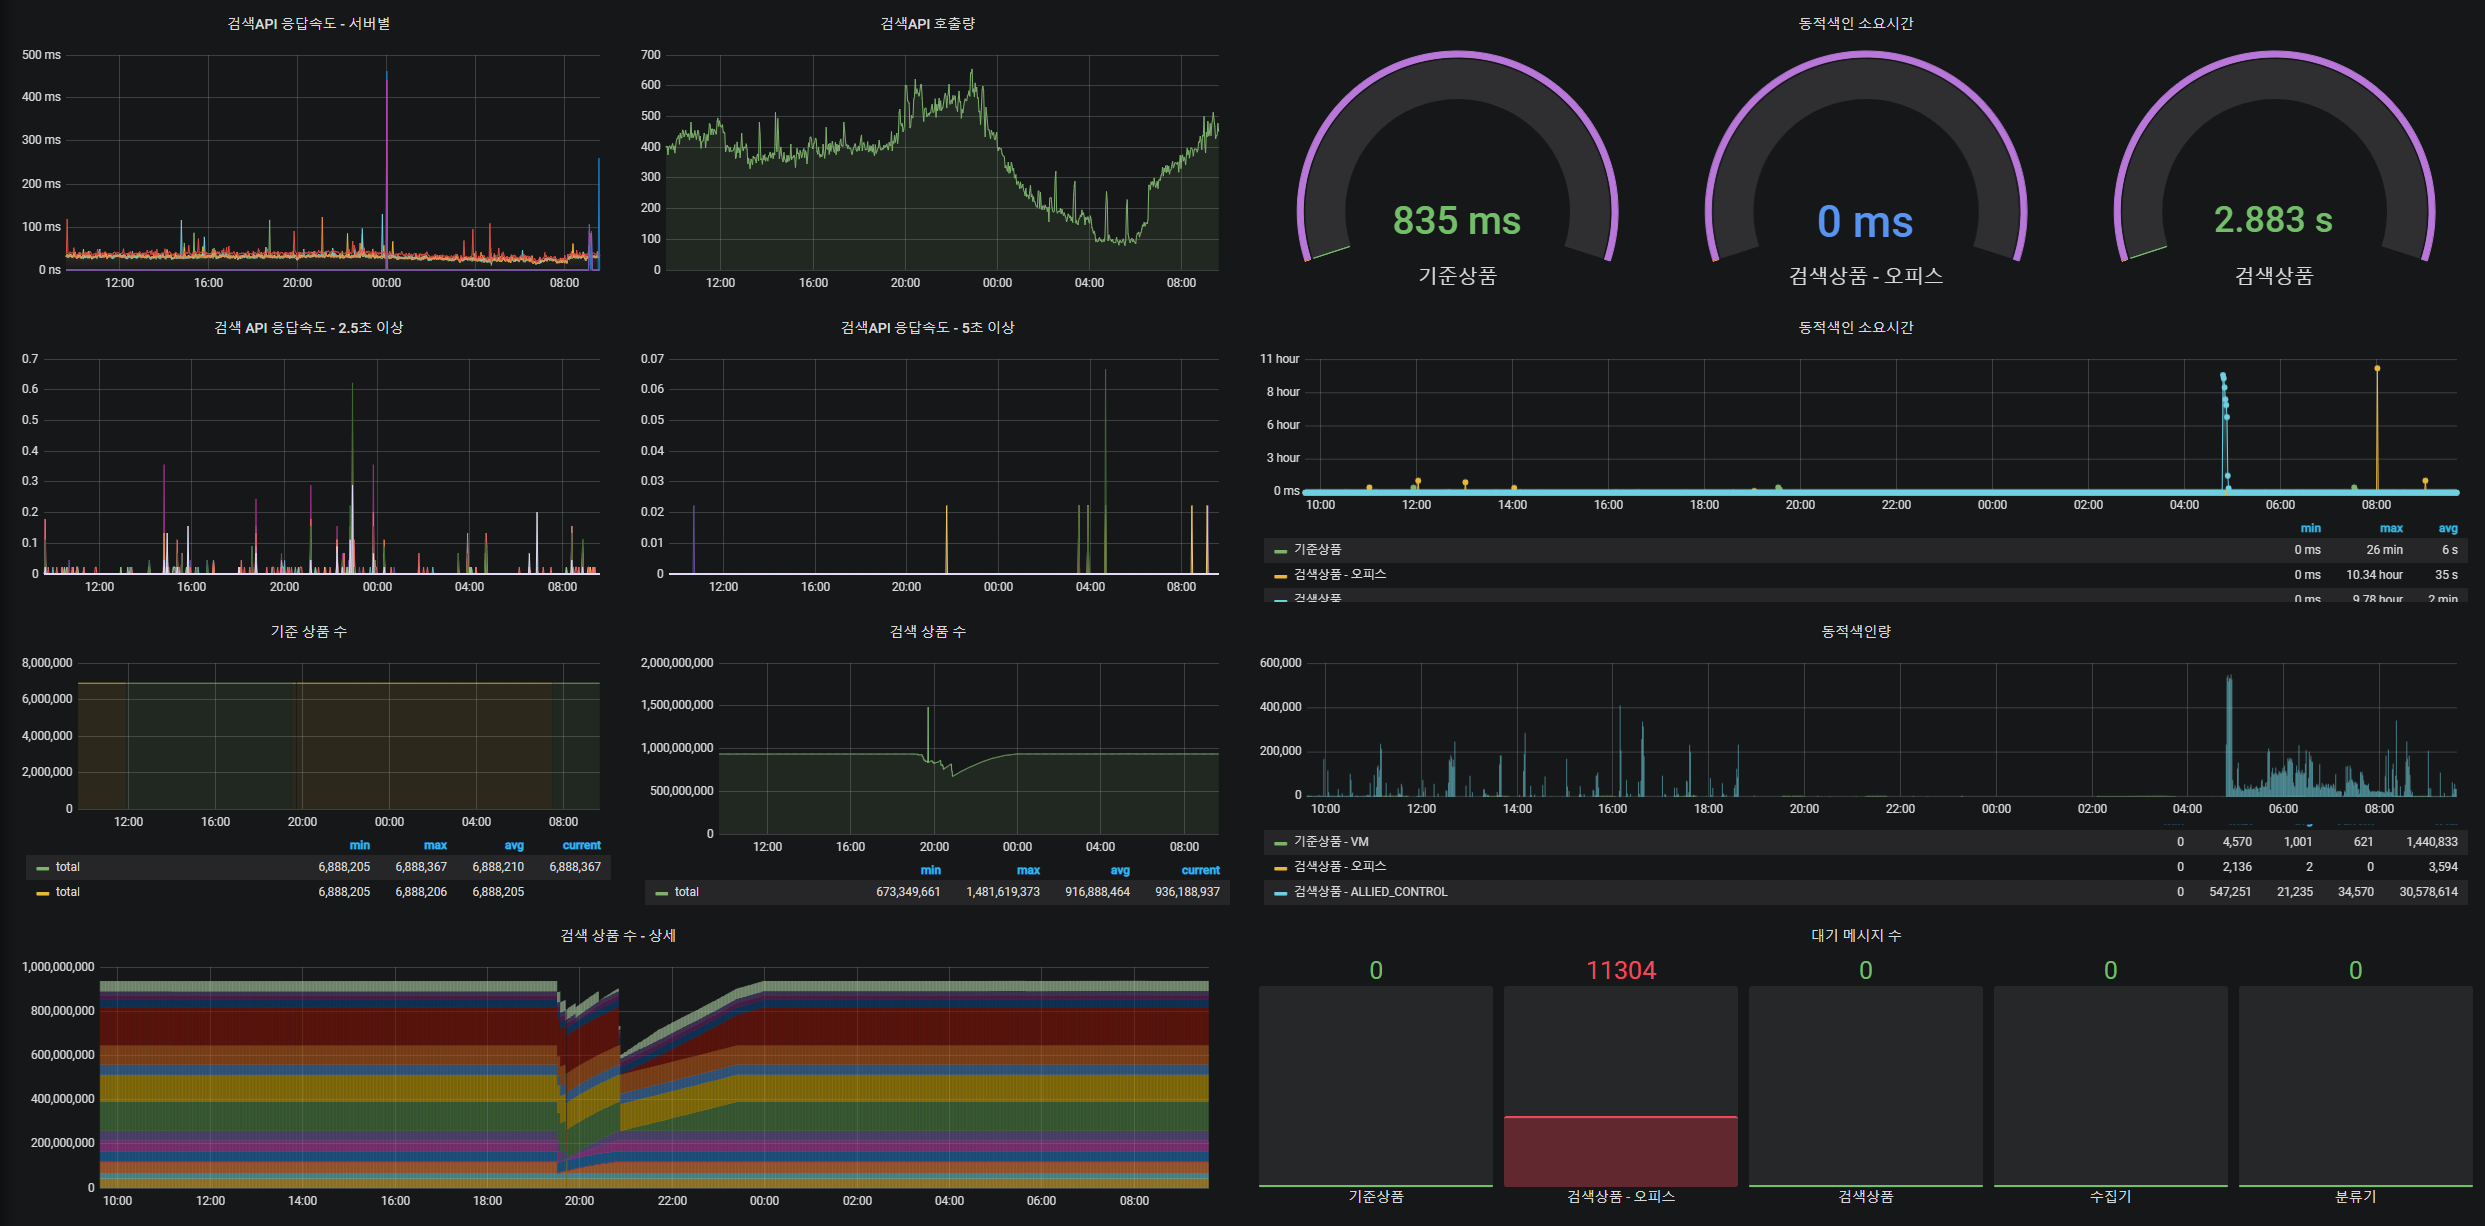 /images/2021-04-09-Commom-Monitoring-System/2021-04-09_dashboard.png